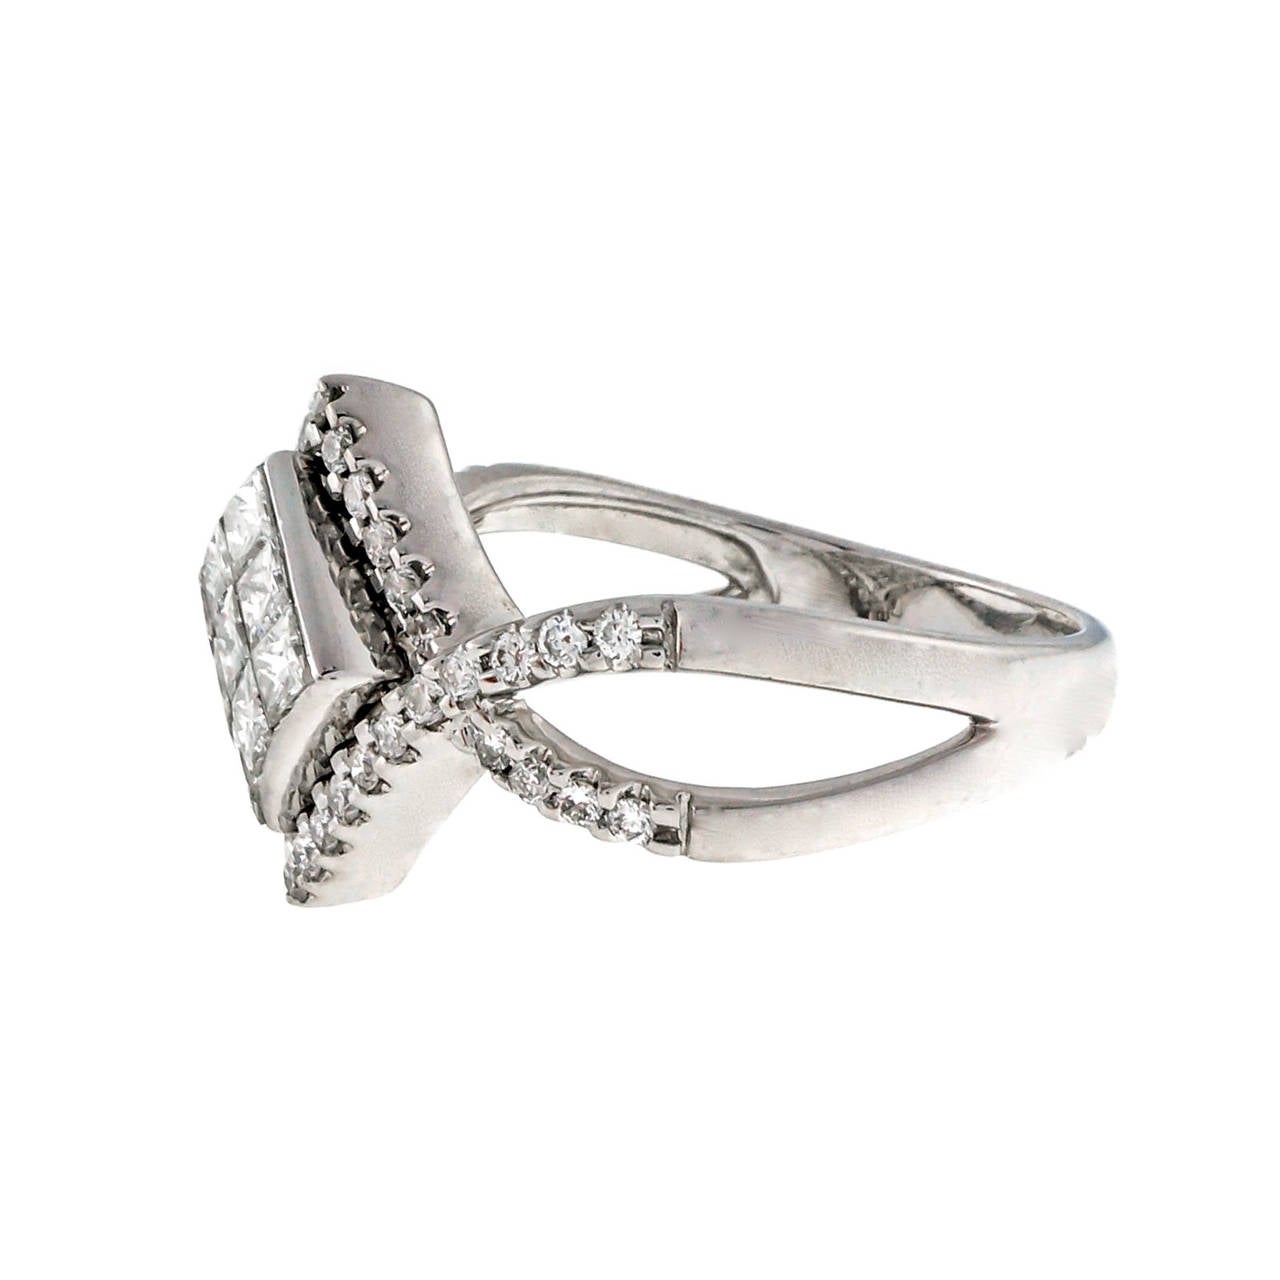 Beautiful Princess cut invisible set and round 14k white gold ring.

9 Princess cut diamonds, approx. total weight .76cts, G – H, VS2 – SI1, 2mm
40 round diamonds, approx. total weight .24cts, G – H, VS2 – SI1
Size 7 and sizeable
14k white